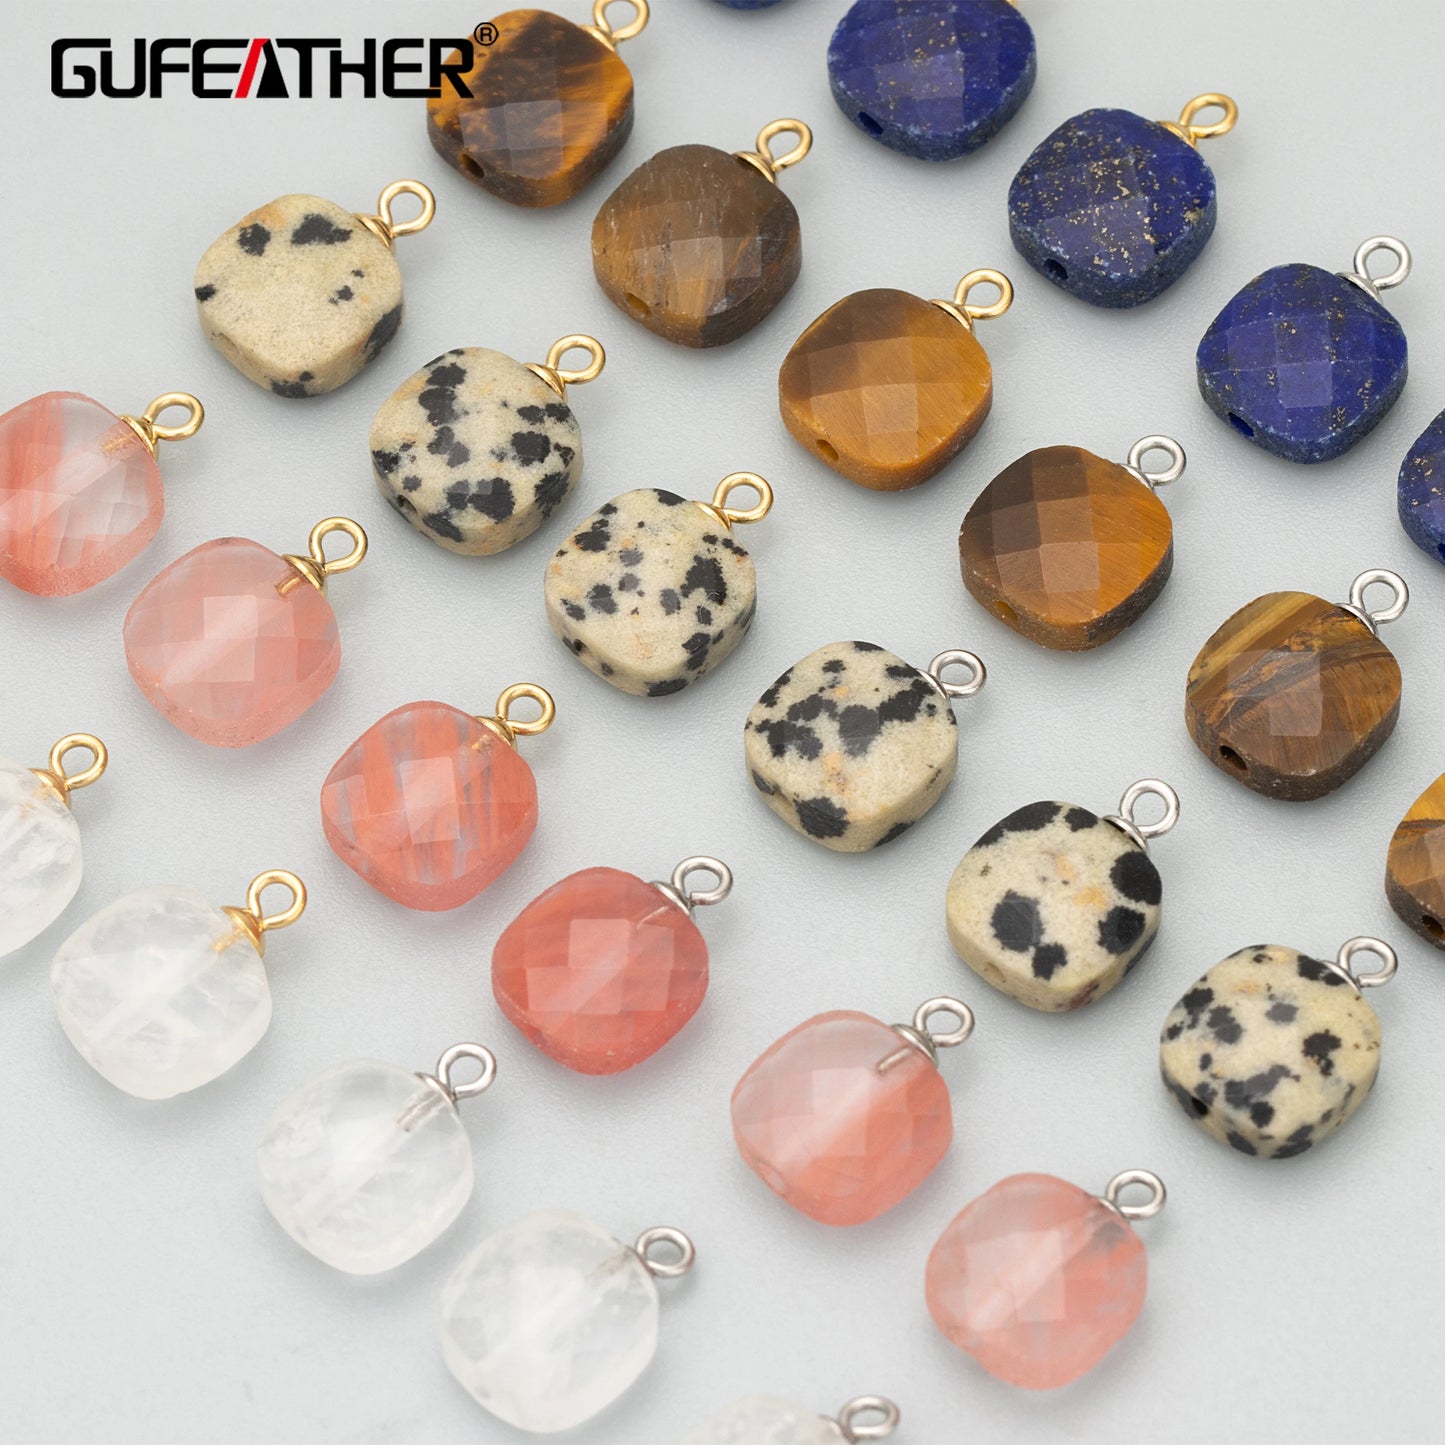 GUFEATHER ME39,jewelry accessories,stainless steel,natural stone,hand made,charms,jewelry making,diy pendants,6pcs/lot